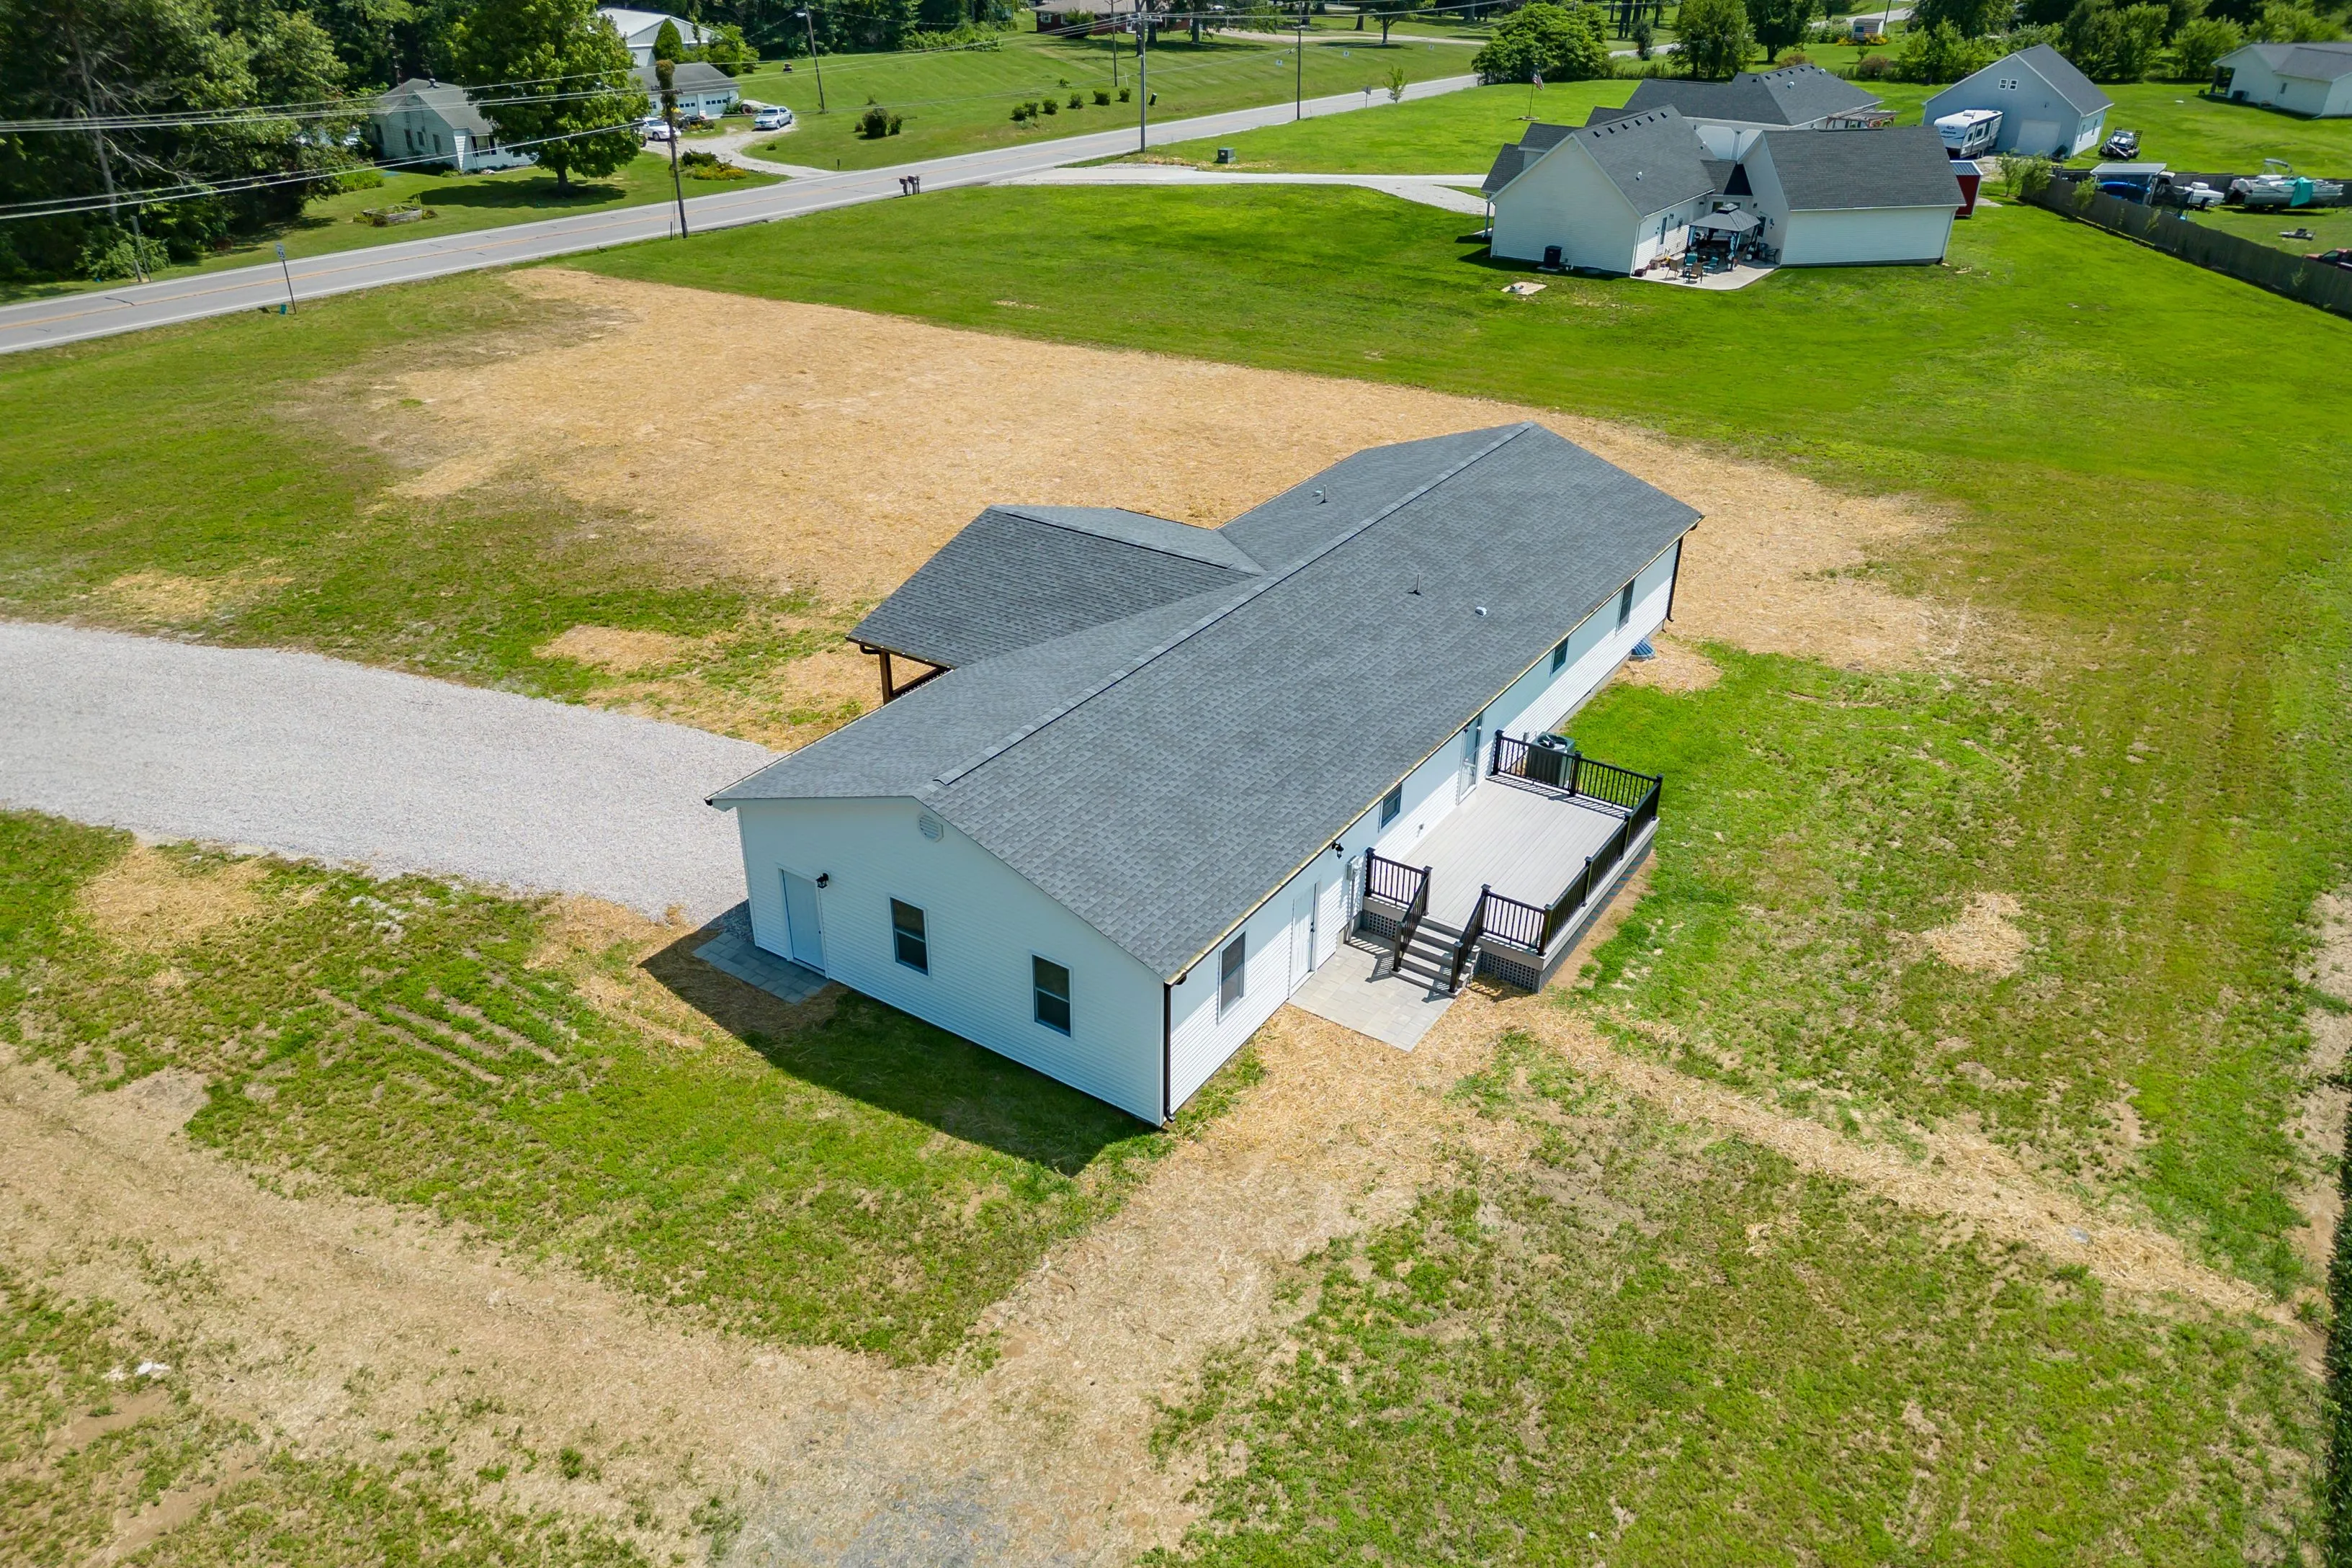 Aerial view of a long, single-story building with a gray shingled roof and white siding, featuring a small deck with patio furniture, surrounded by a patchy grass field and a gravel driveway, with other residential properties in the background.